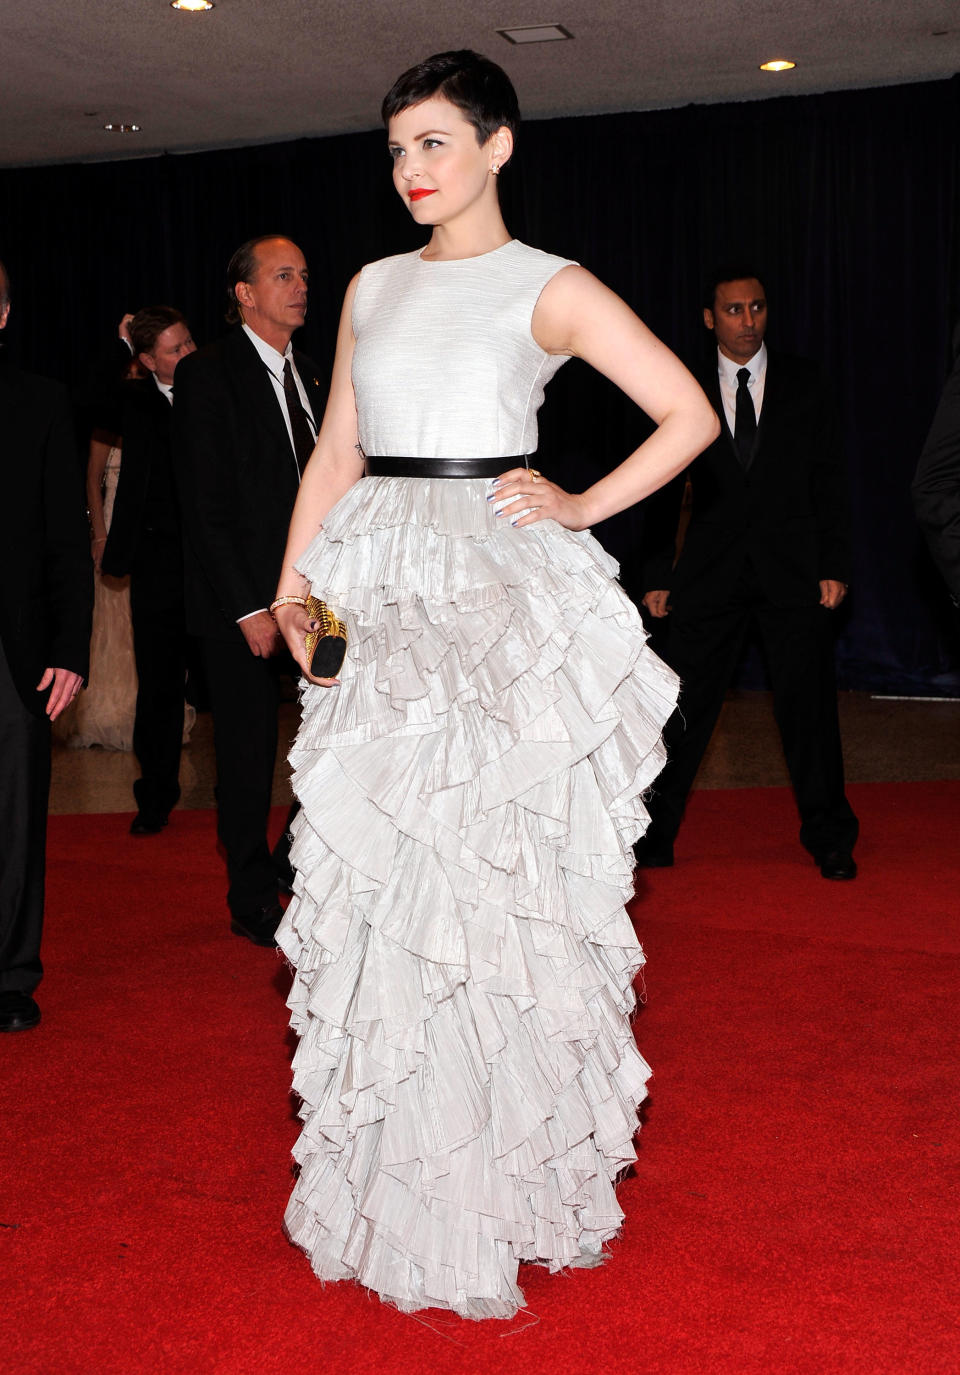 WASHINGTON, DC - APRIL 28: Ginnifer Goodwin attends the 98th Annual White House Correspondents' Association Dinner at the Washington Hilton on April 28, 2012 in Washington, DC. (Photo by Stephen Lovekin/Getty Images)